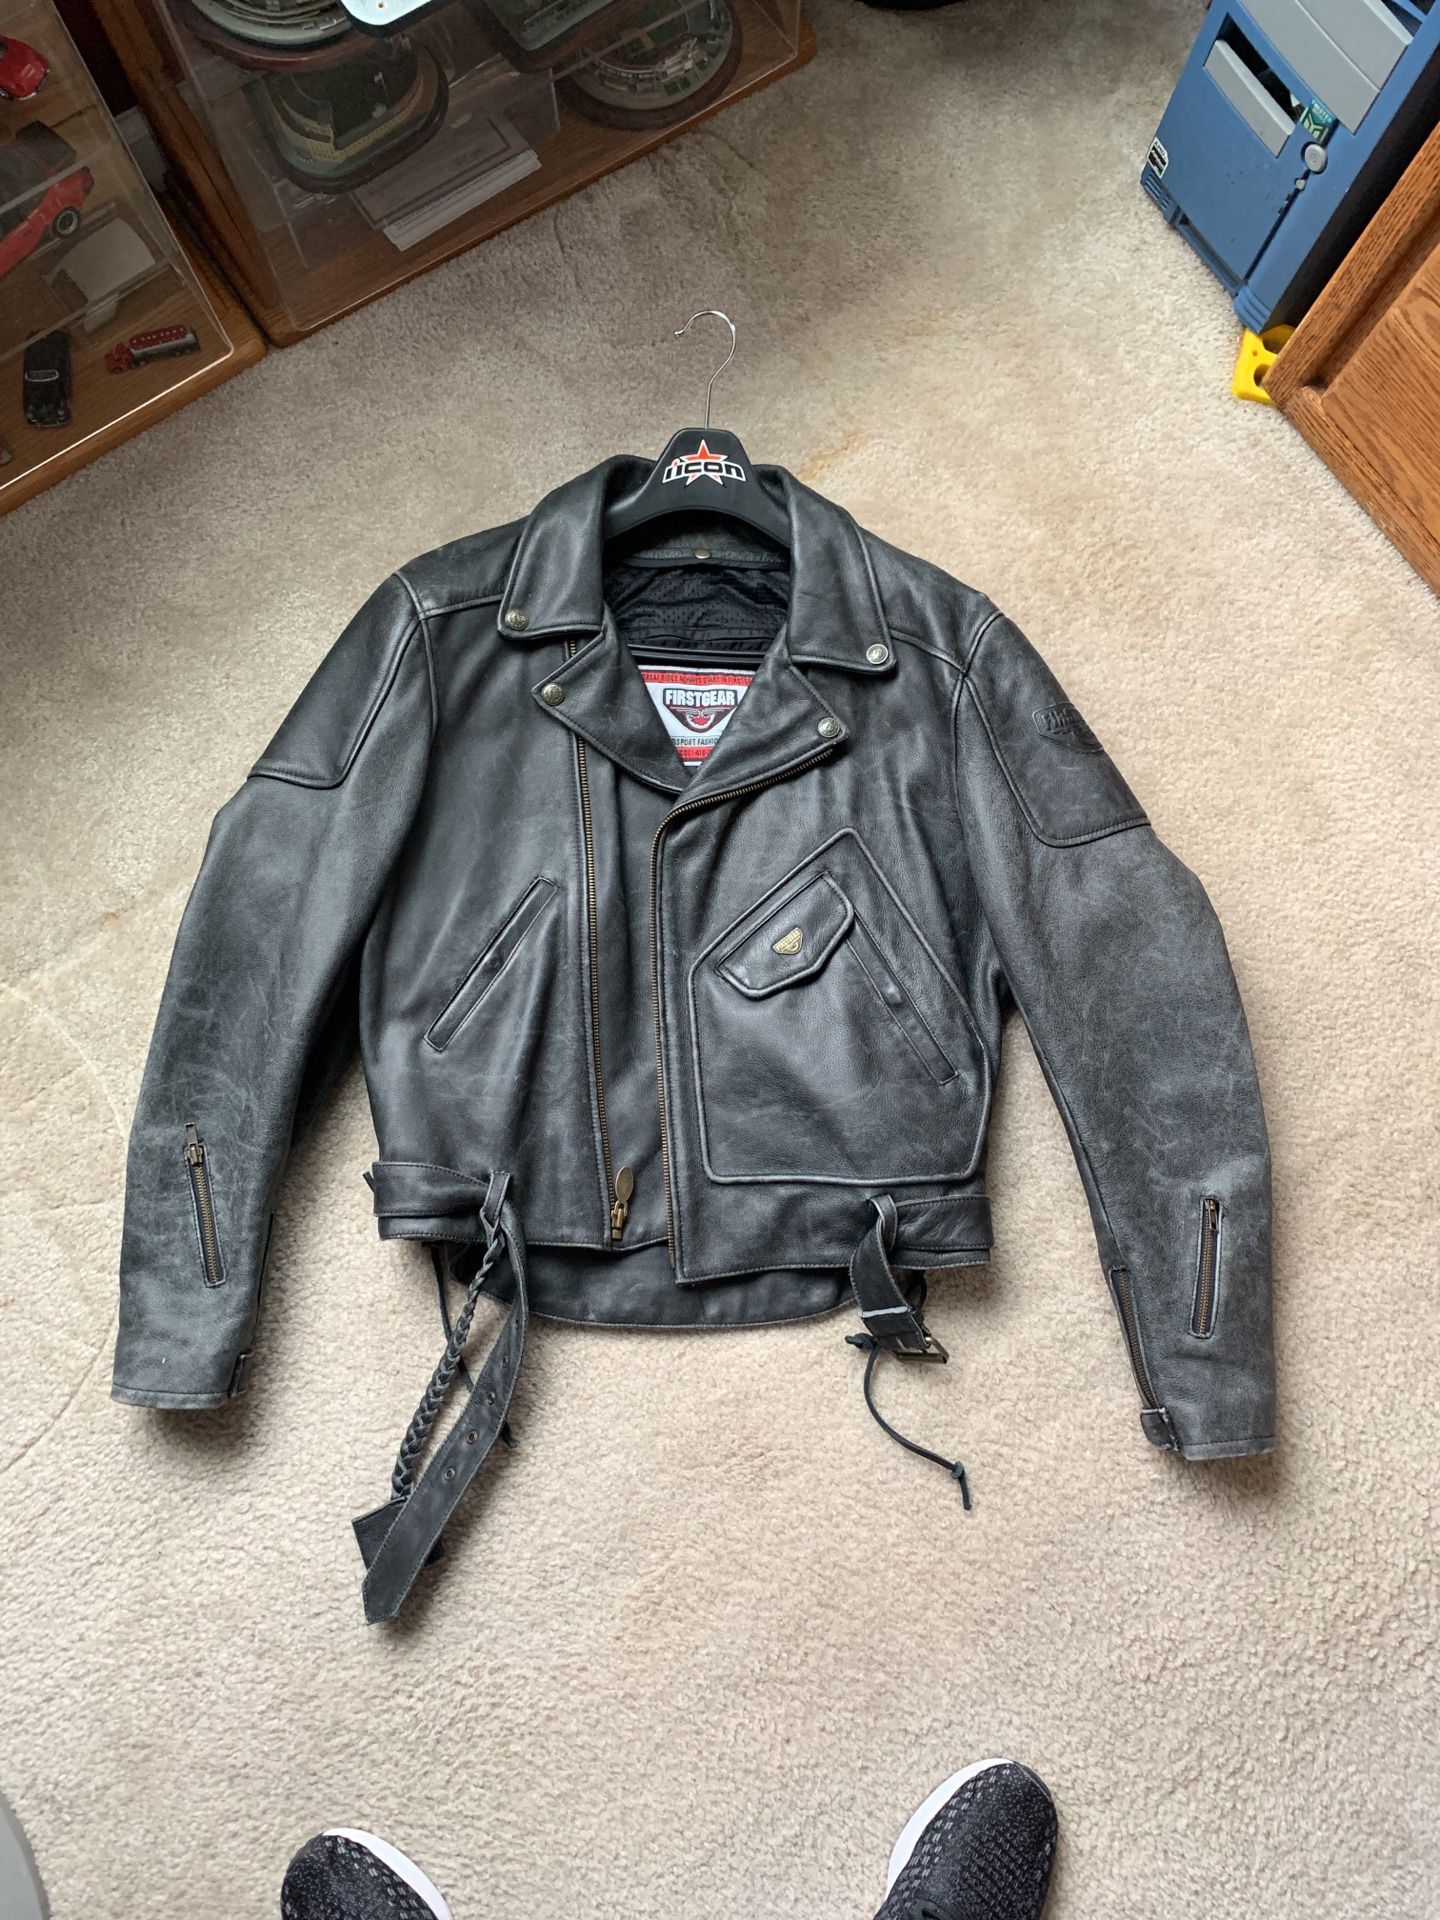 FIRSTGEAR Motorcycle Jacket - Leather - LARGE